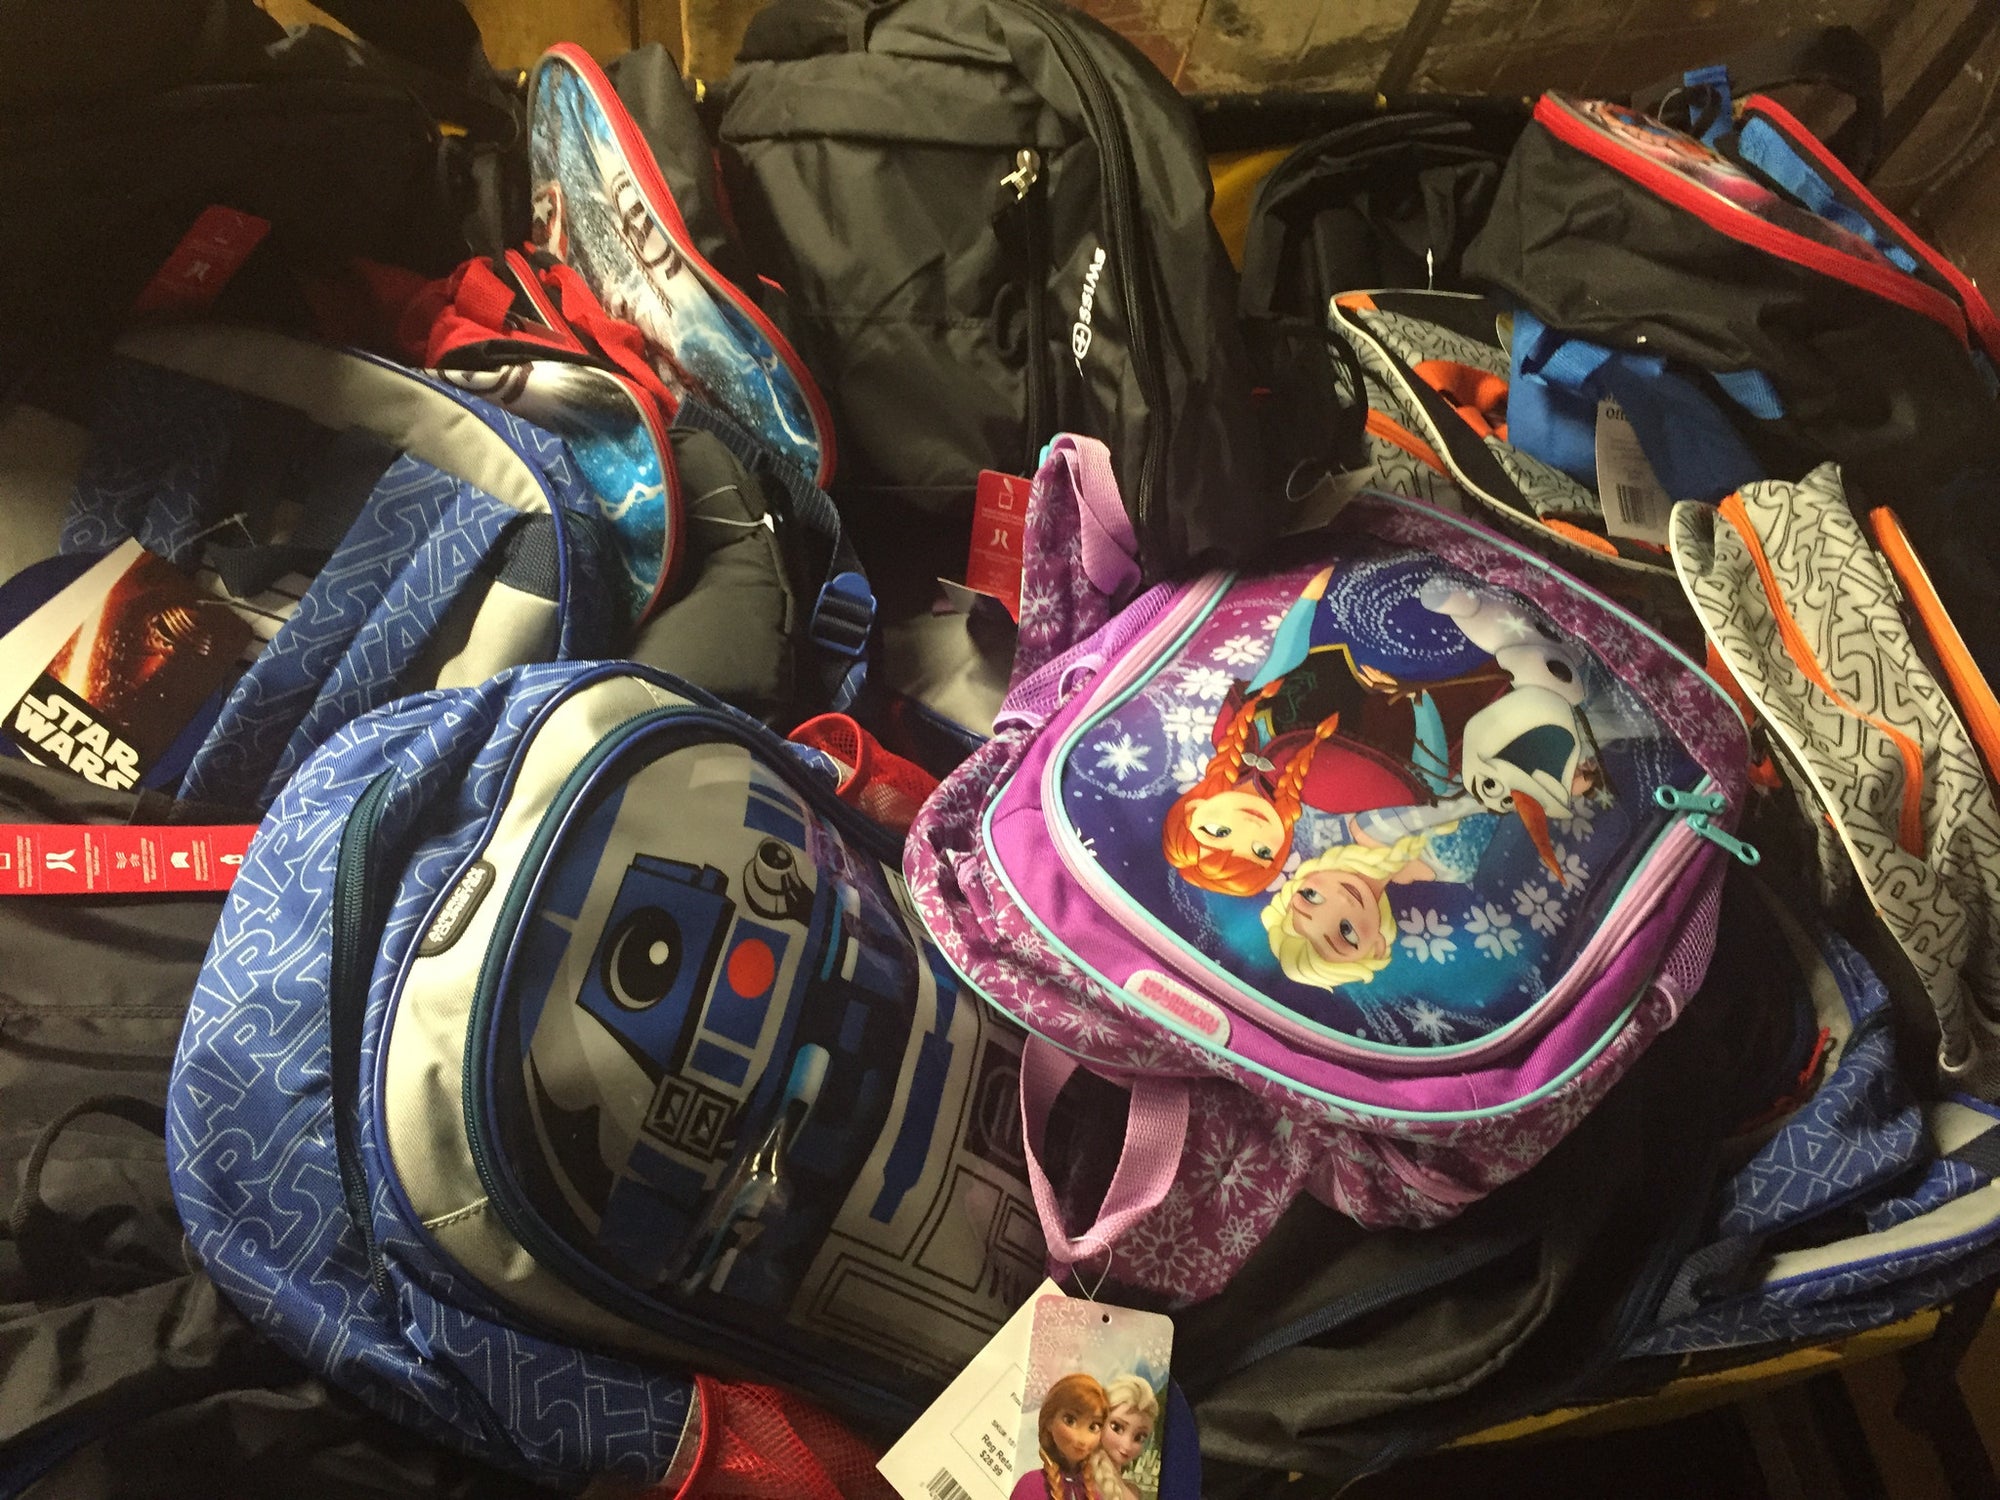 More than 300 backpacks delivered to students in need